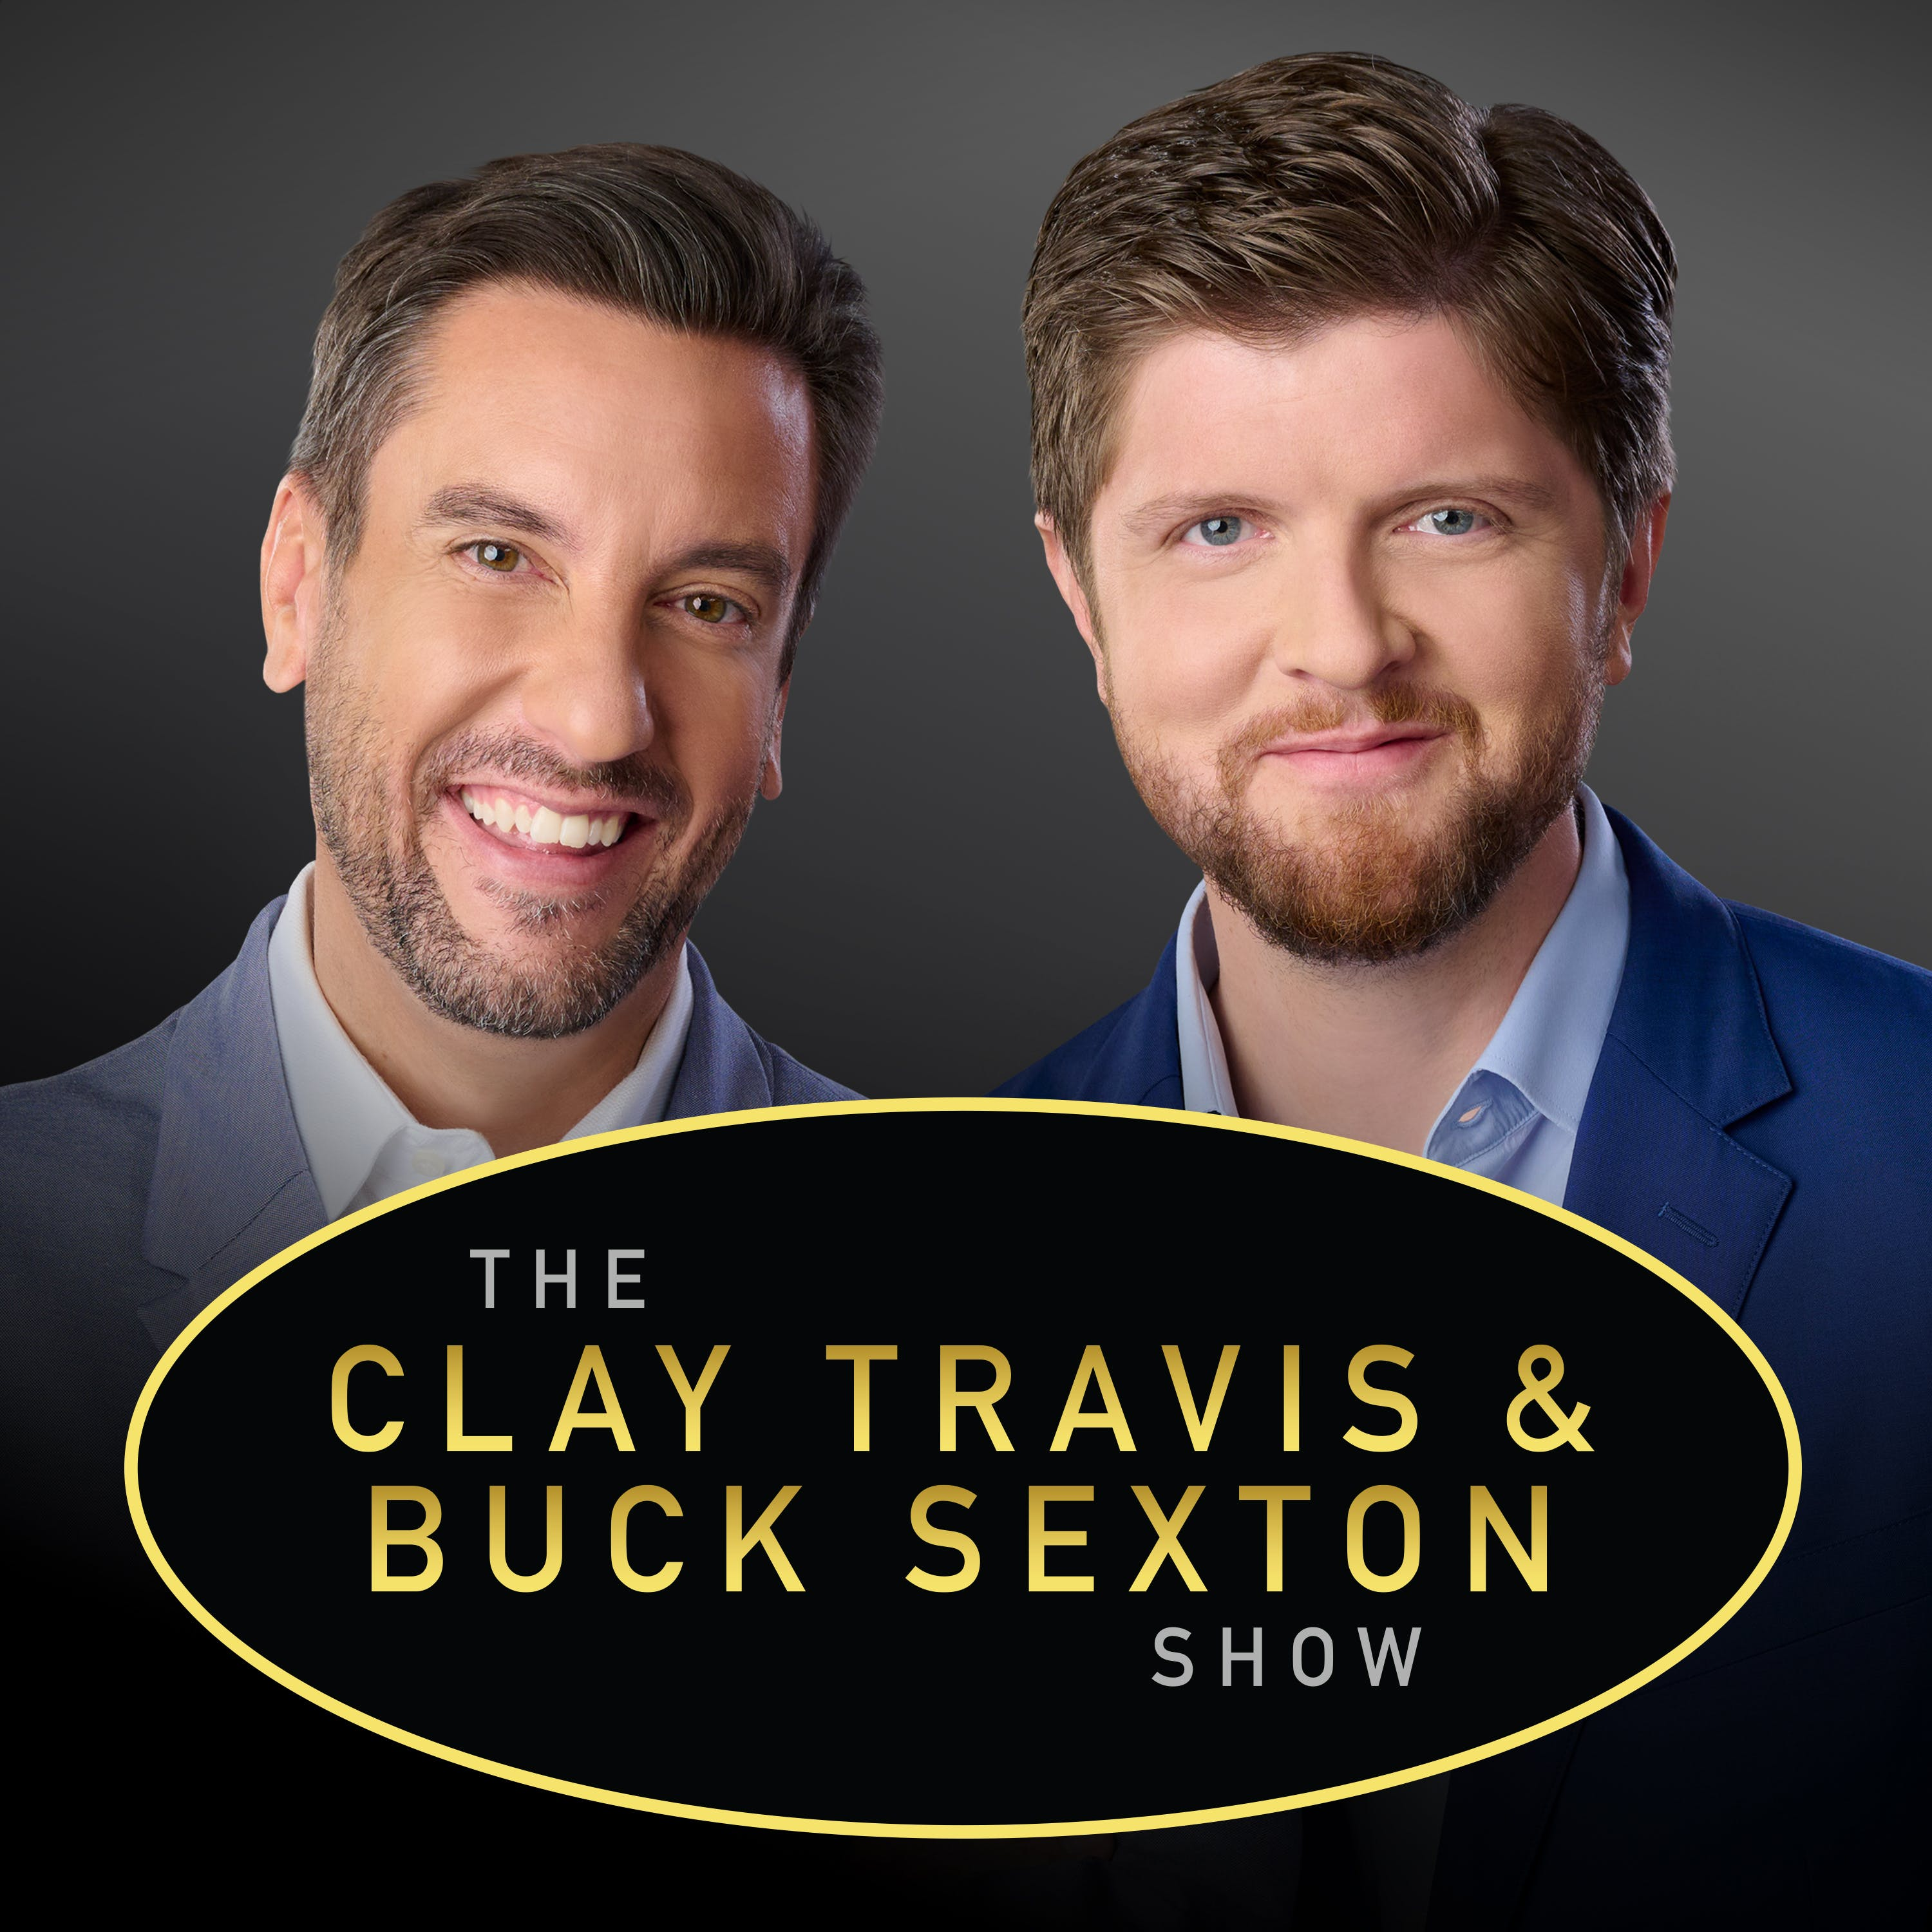 Clay Travis and Buck Sexton Show H1 – Sep 14 2021